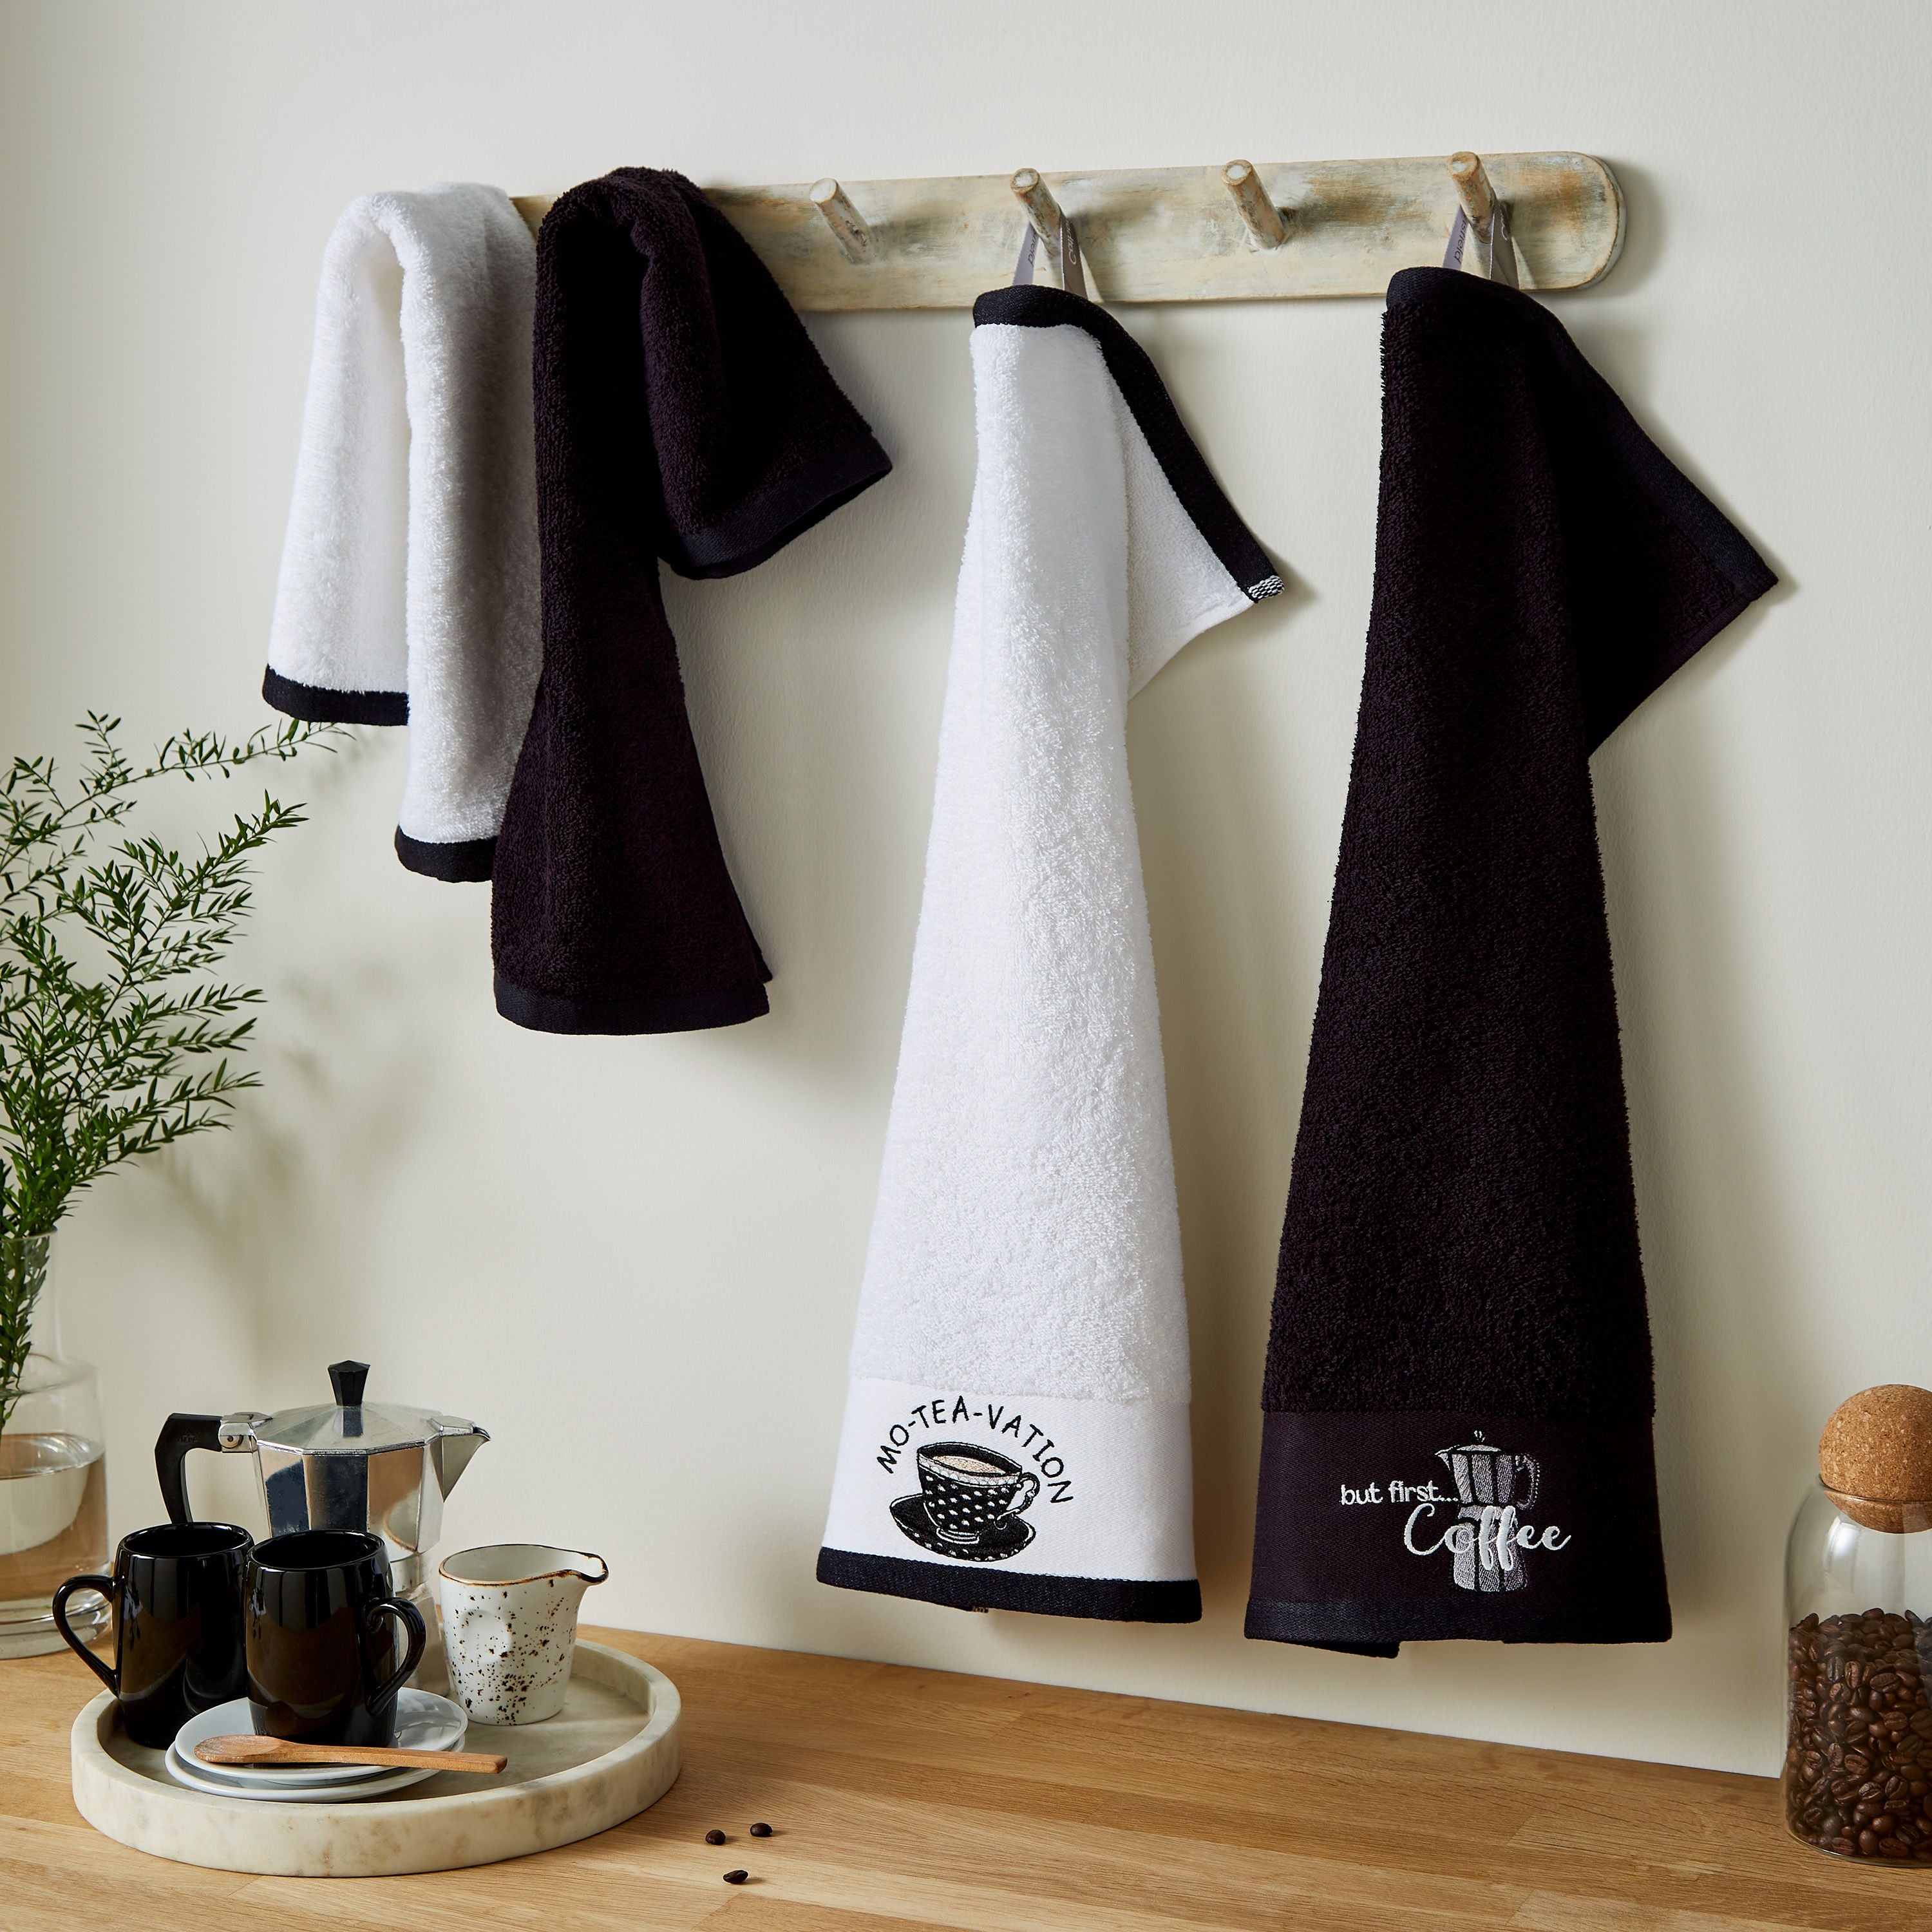 Tea and Coffee Pack of 4, Tea Towels (Black and White)